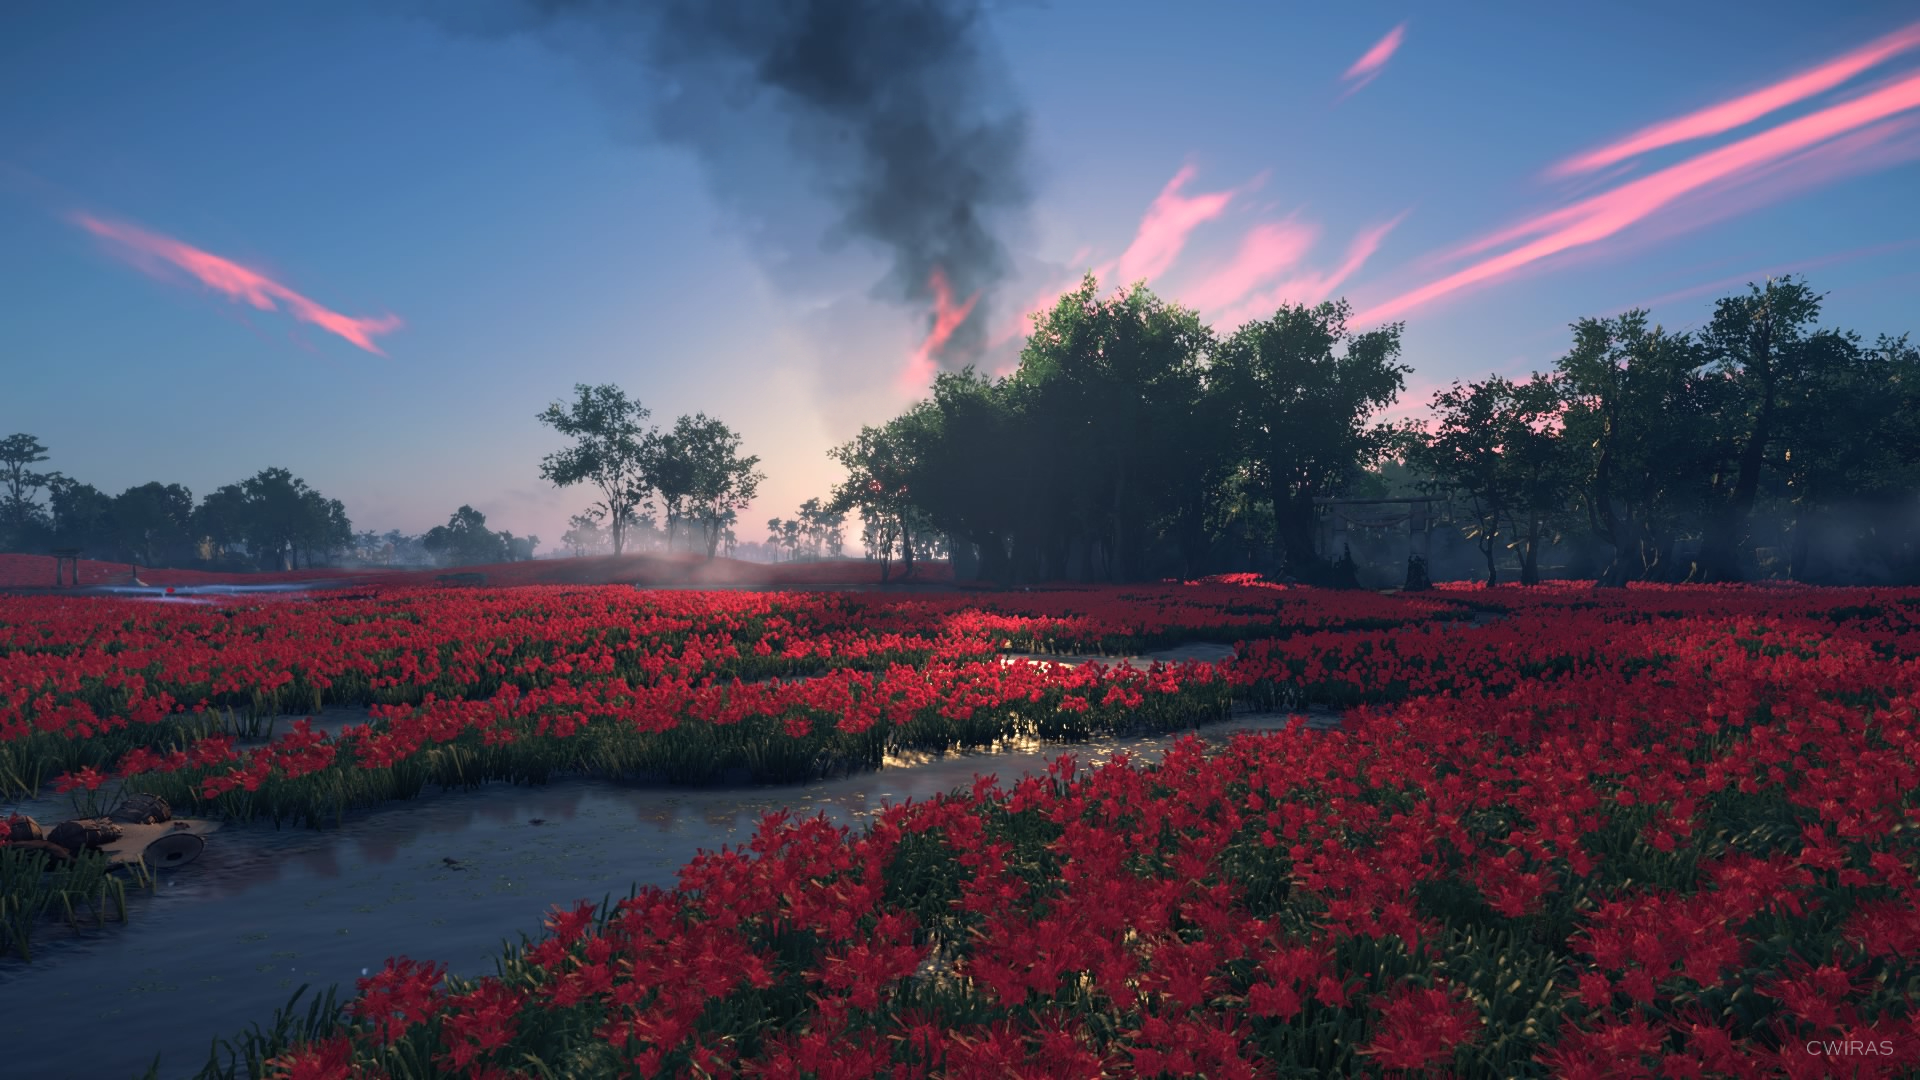 Video Game Art Video Games Screen Shot Sky Flower Game Red Sony River PlayStation PlayStation 4 Ghos 1920x1080